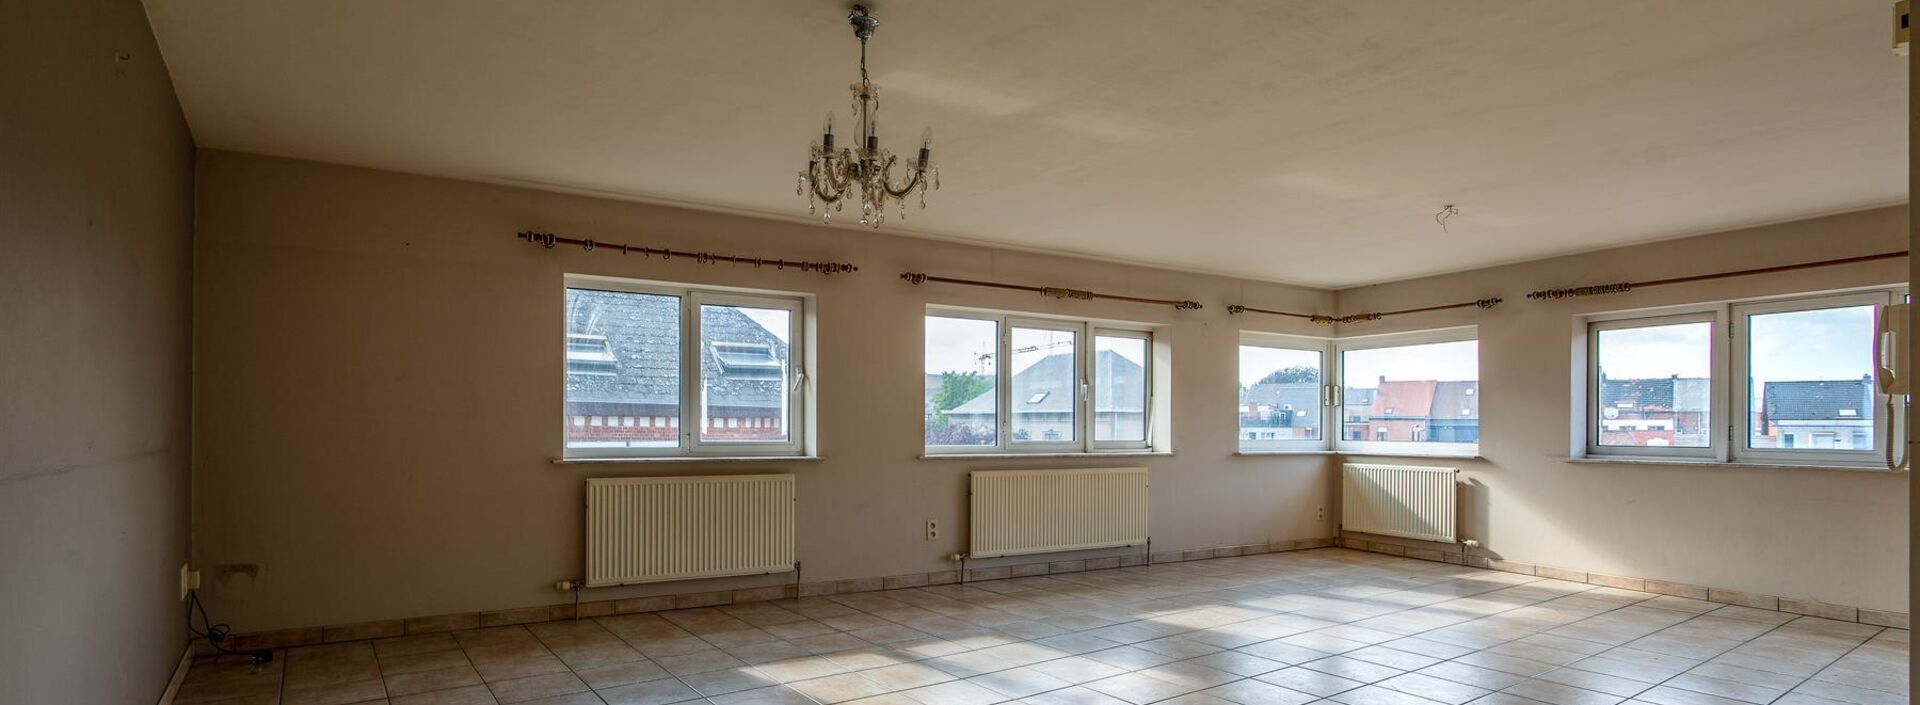 Appartement te huur in Herenthout